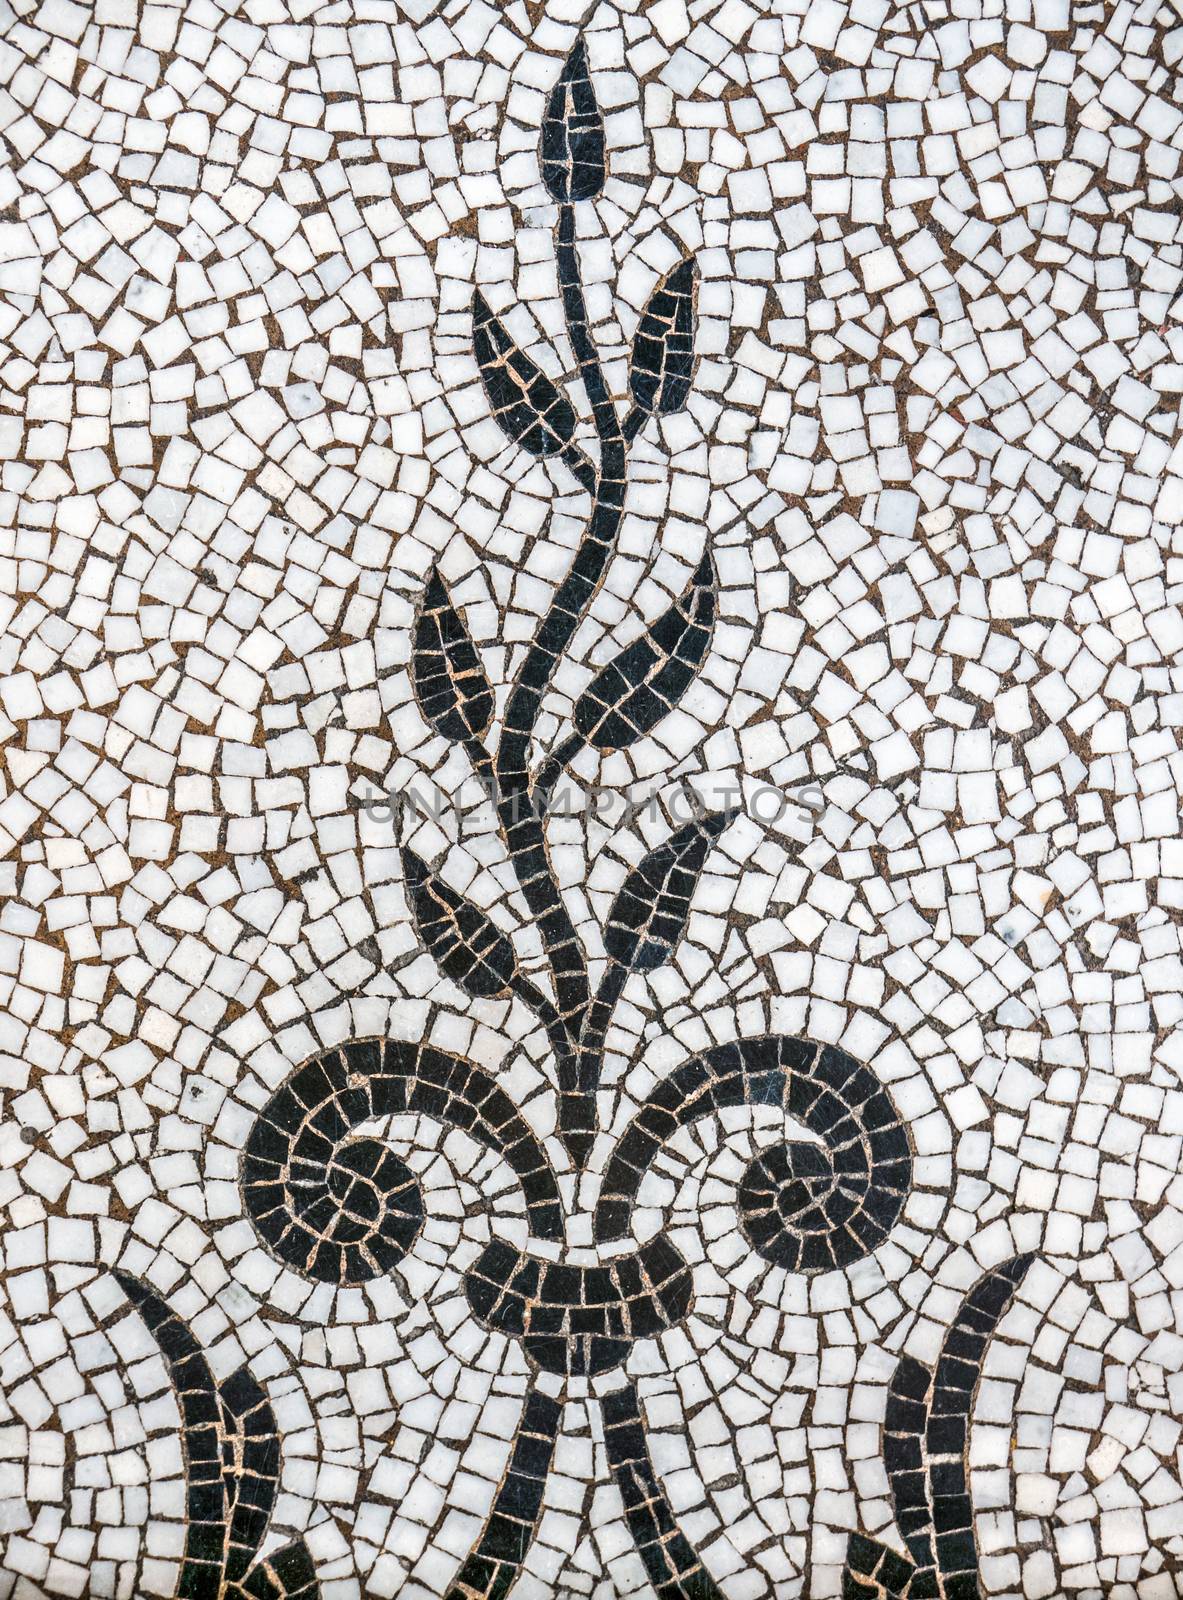 Background Pattern Of Ancient Mosaic Tiles Depicting A Plant Of Vine